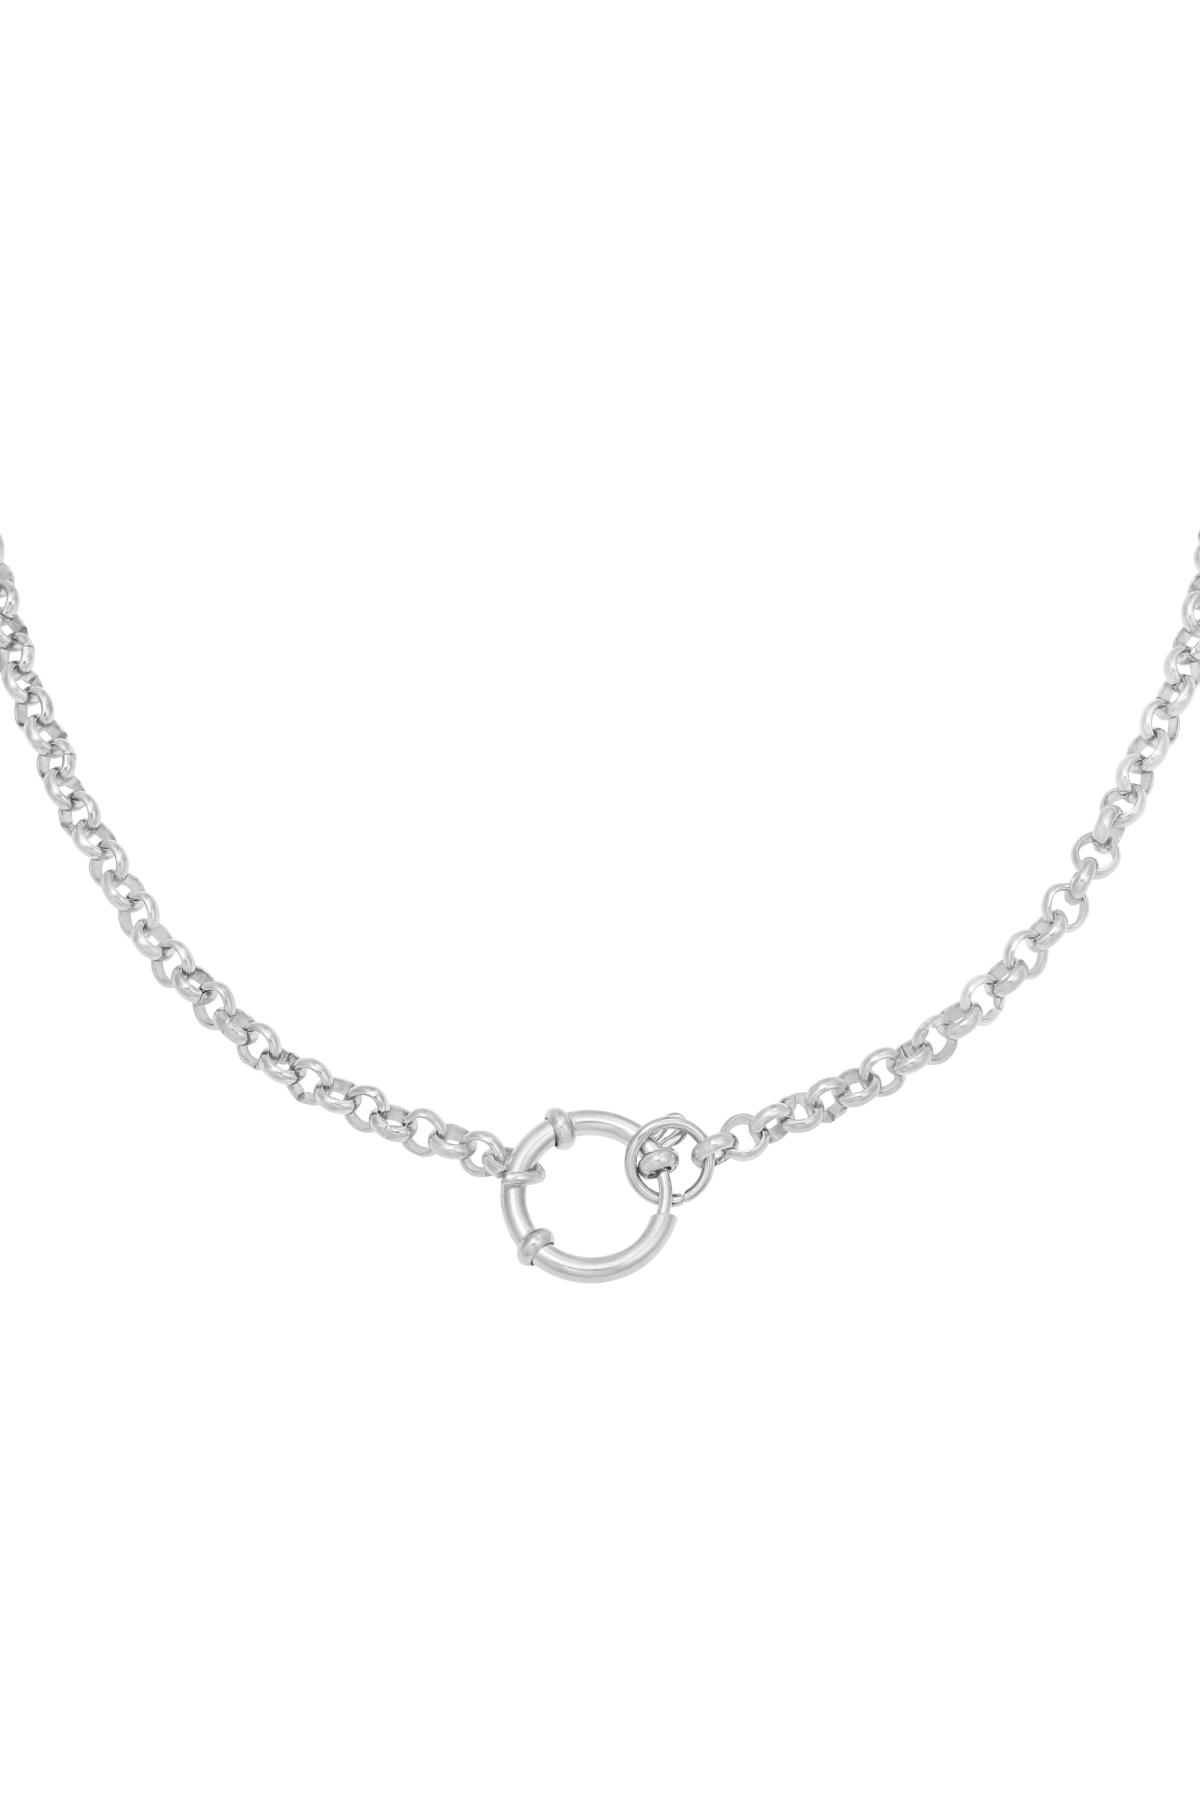 Necklace Chain Rylee Silver Stainless Steel